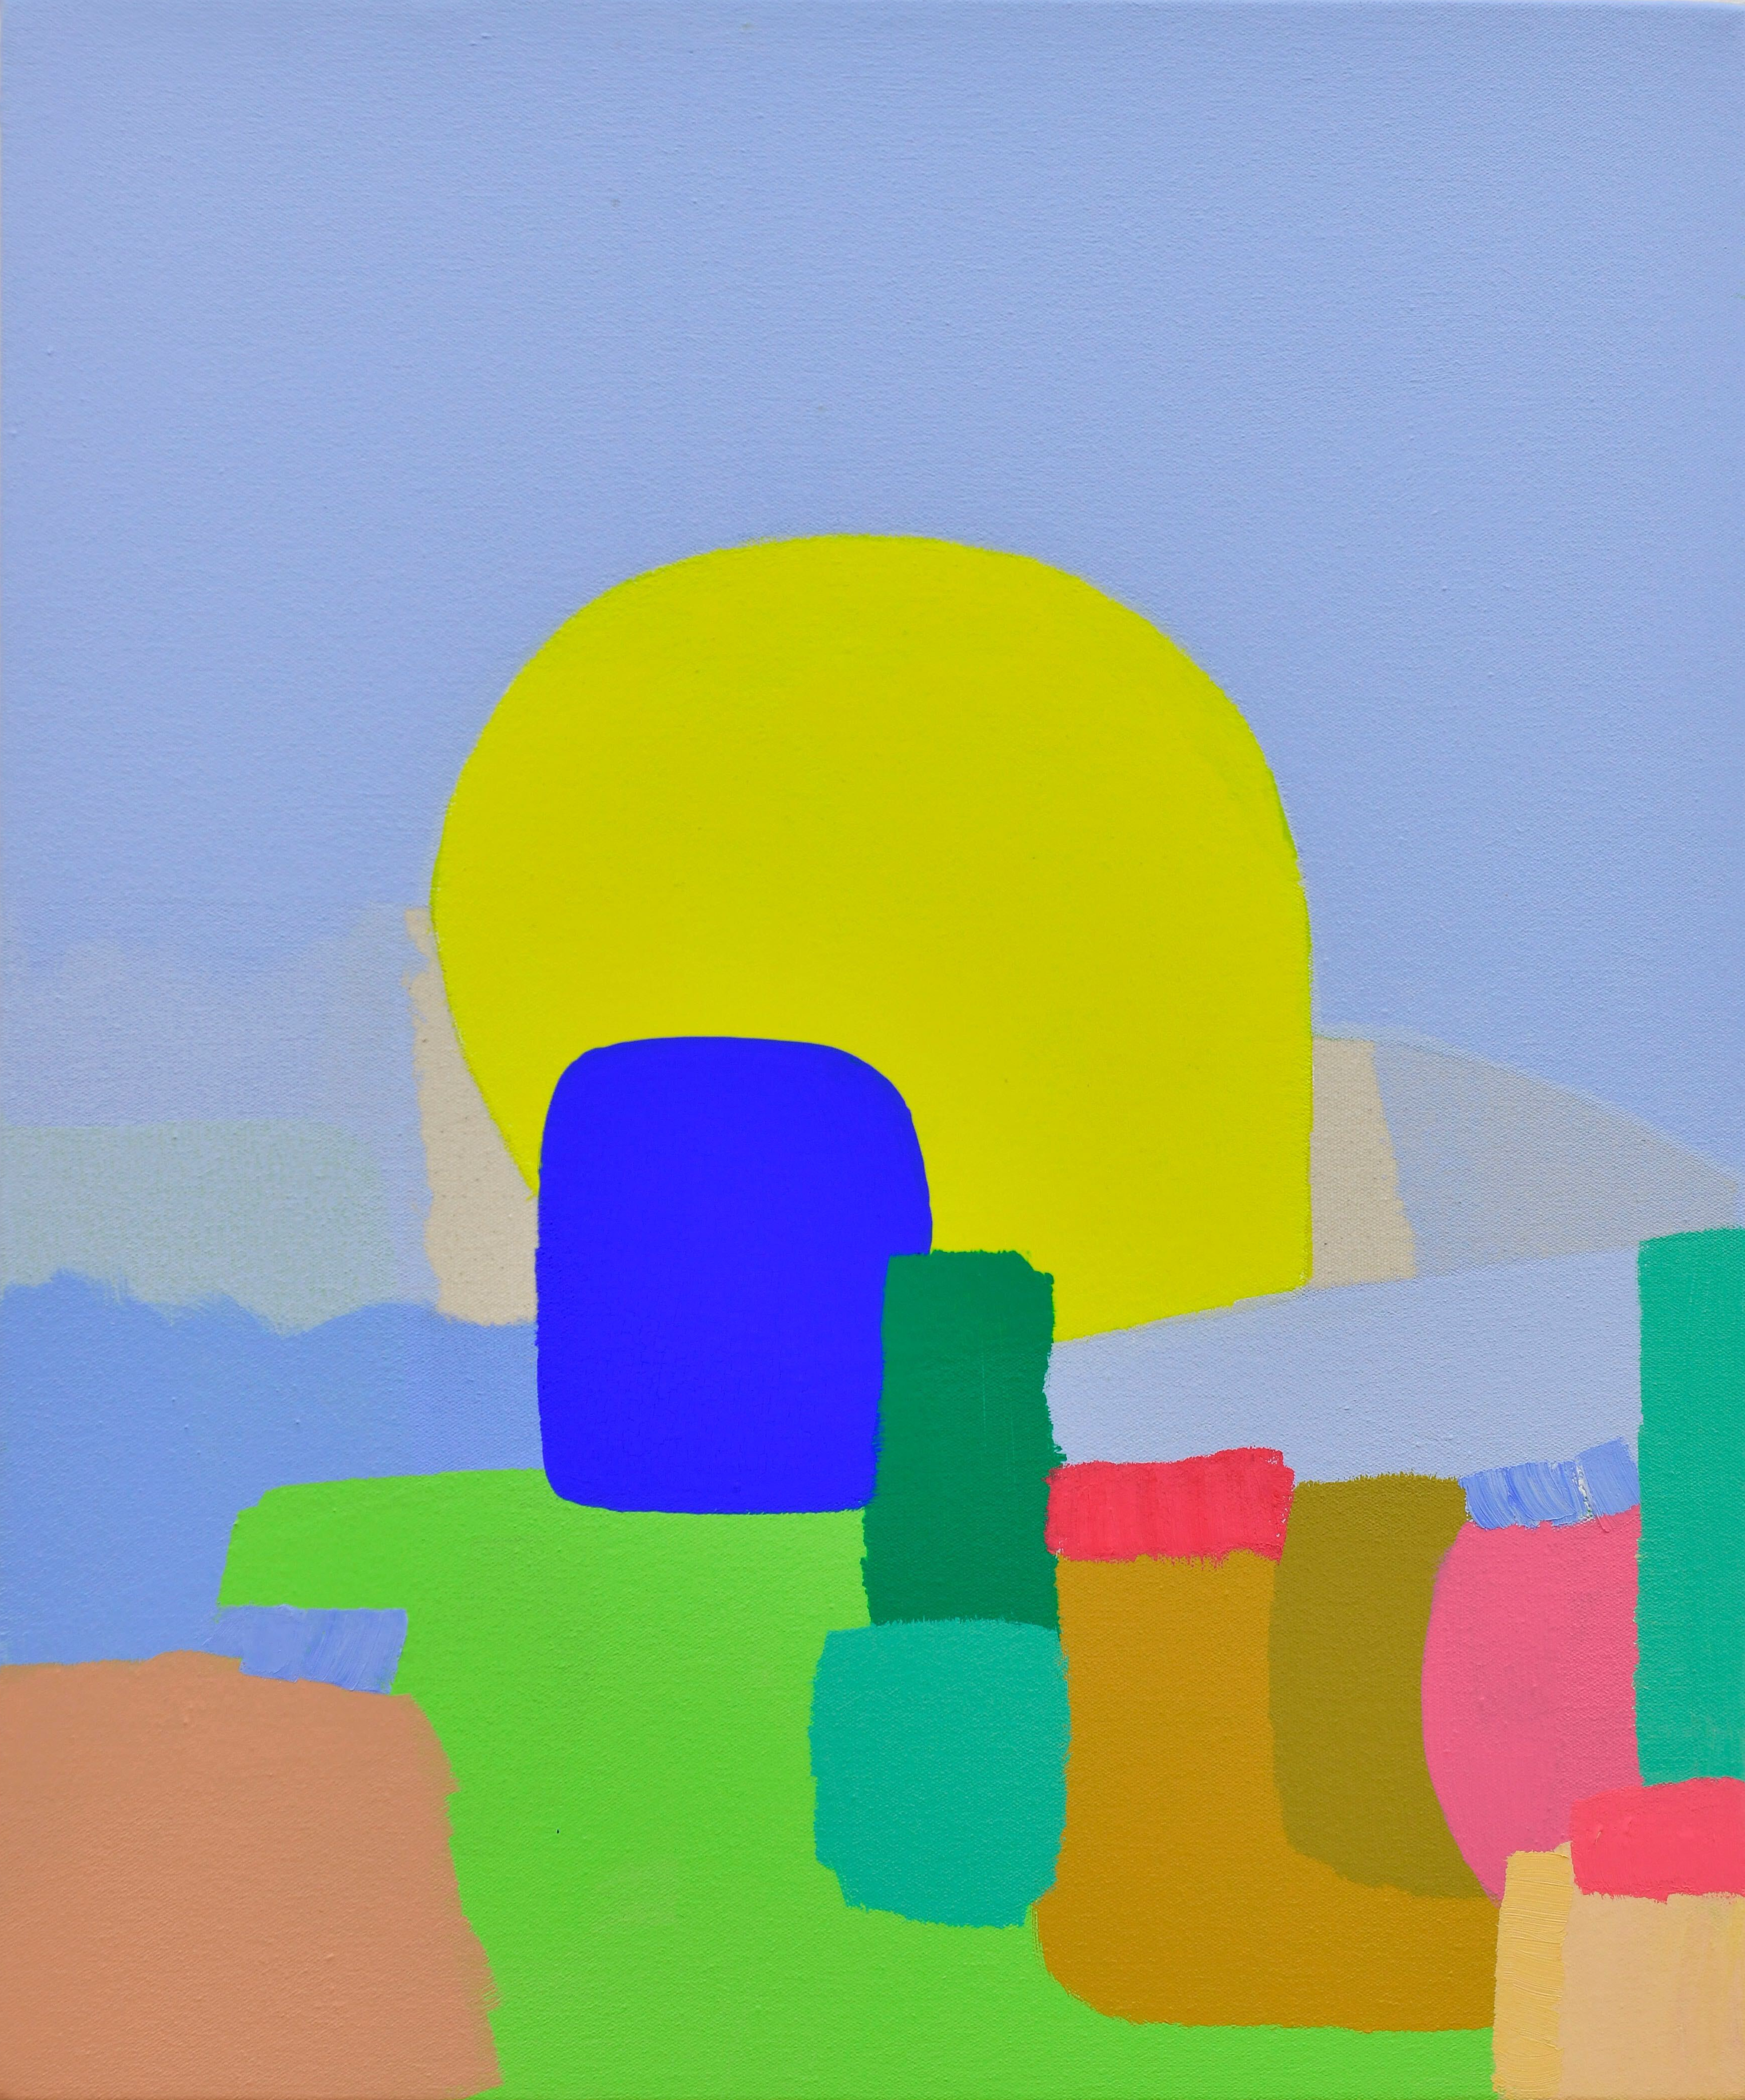 An abstract landscape of brightly colored shapes.